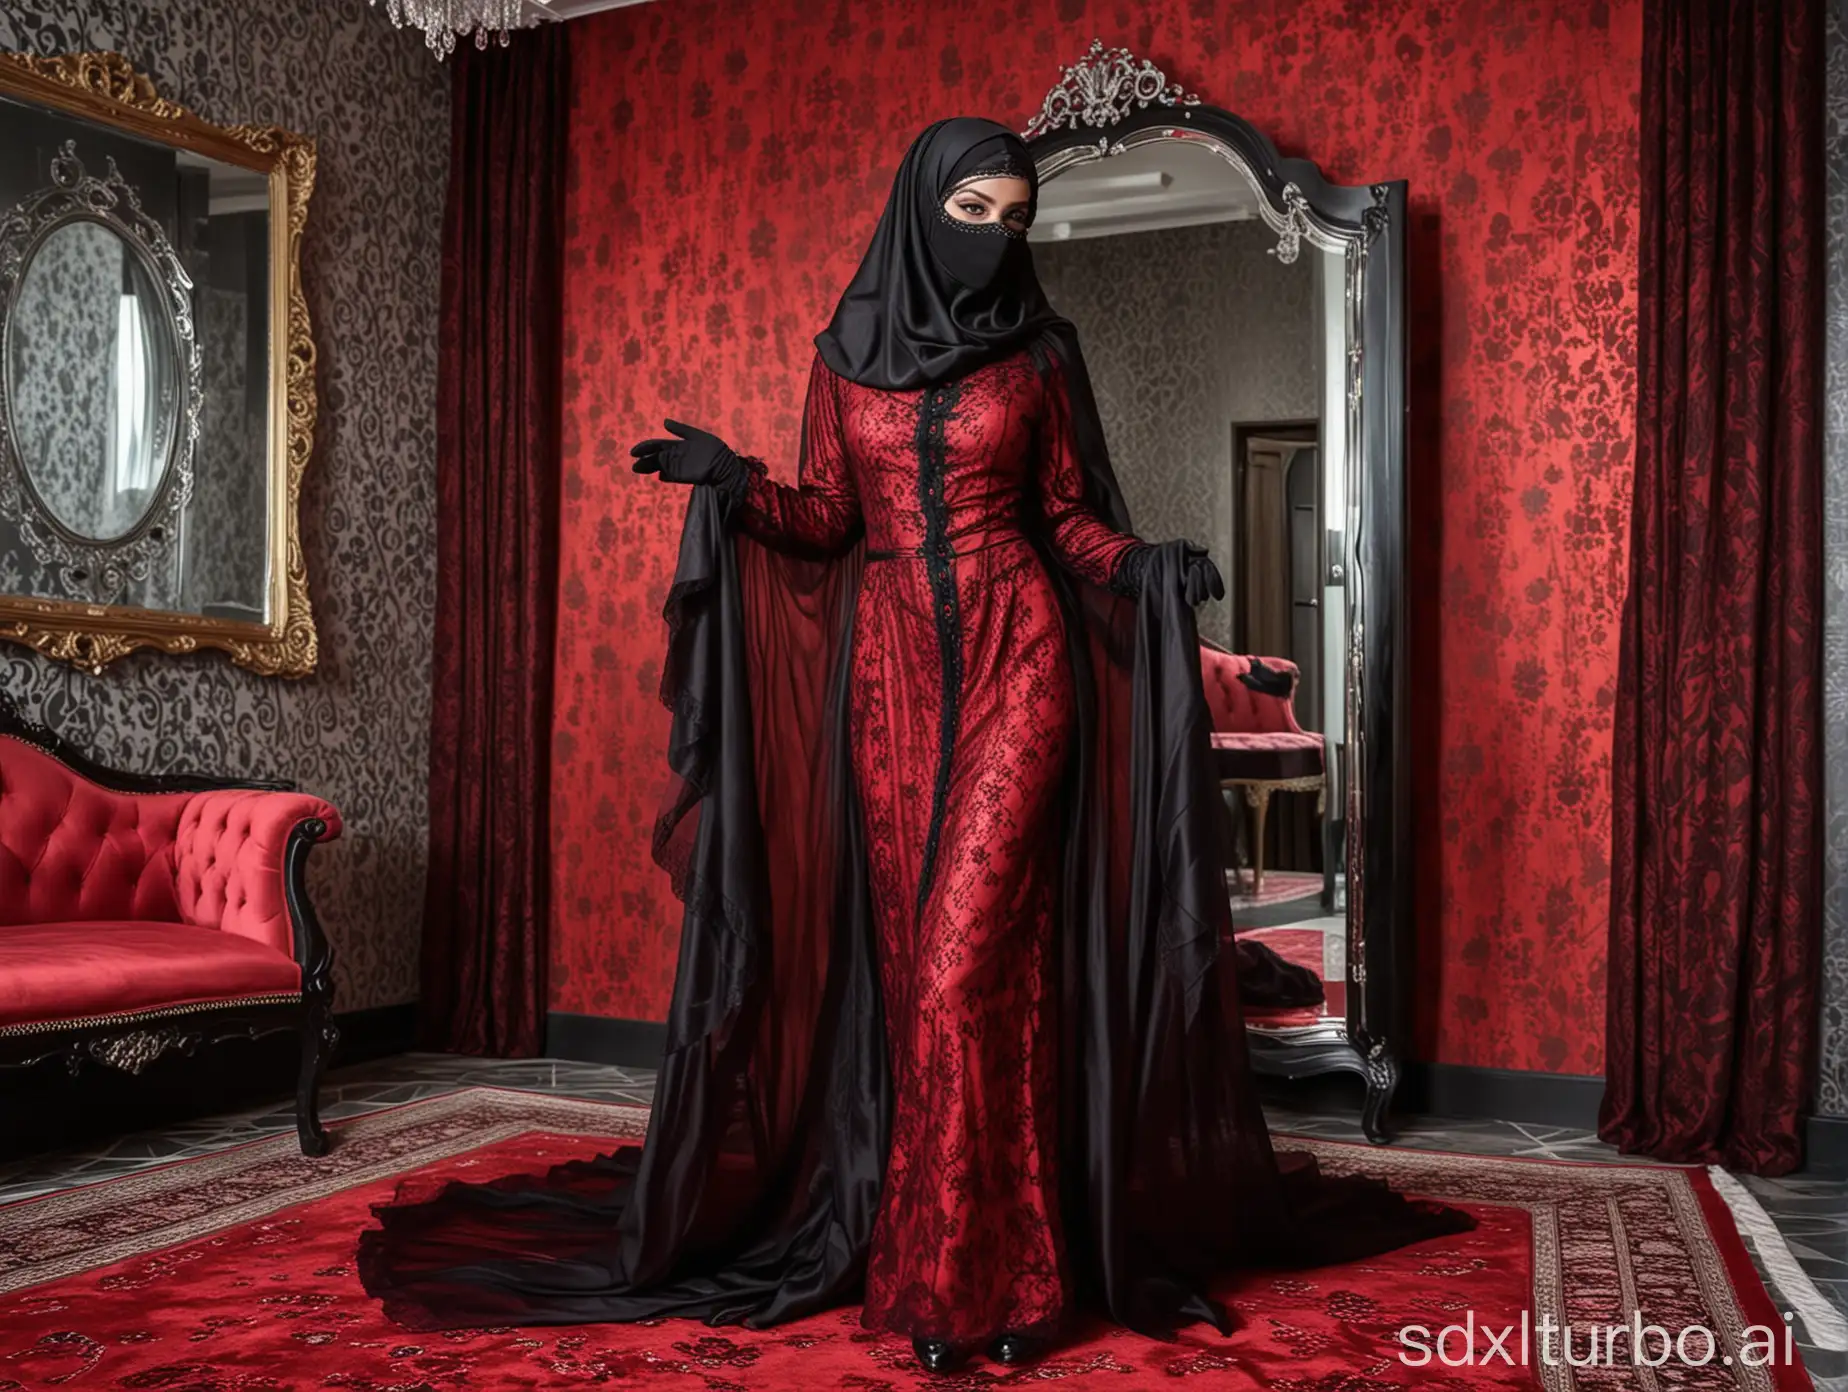 Feminized man, standing sissy, small chest, Personality erased and encased in red translucent night abaya, blue eyes, black niqab, mask on mouth, lace transparent veil mask on eyes, high heels shoes.
Black gloves.
Luxury room, marbled wall, with red satin bed.
Mirror in the background.